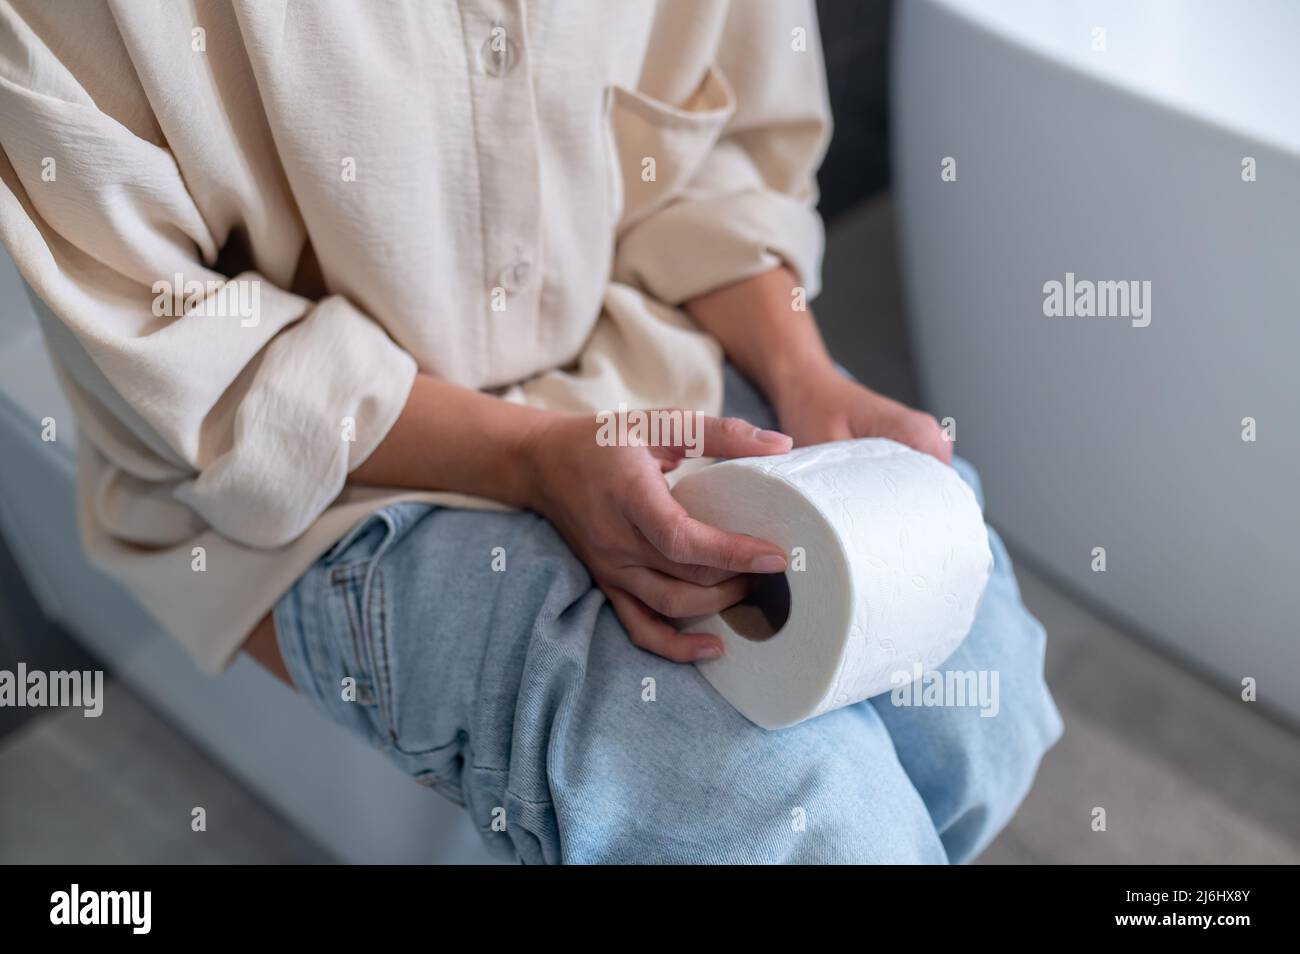 Close up picture of a woman in the water closet Stock Photo